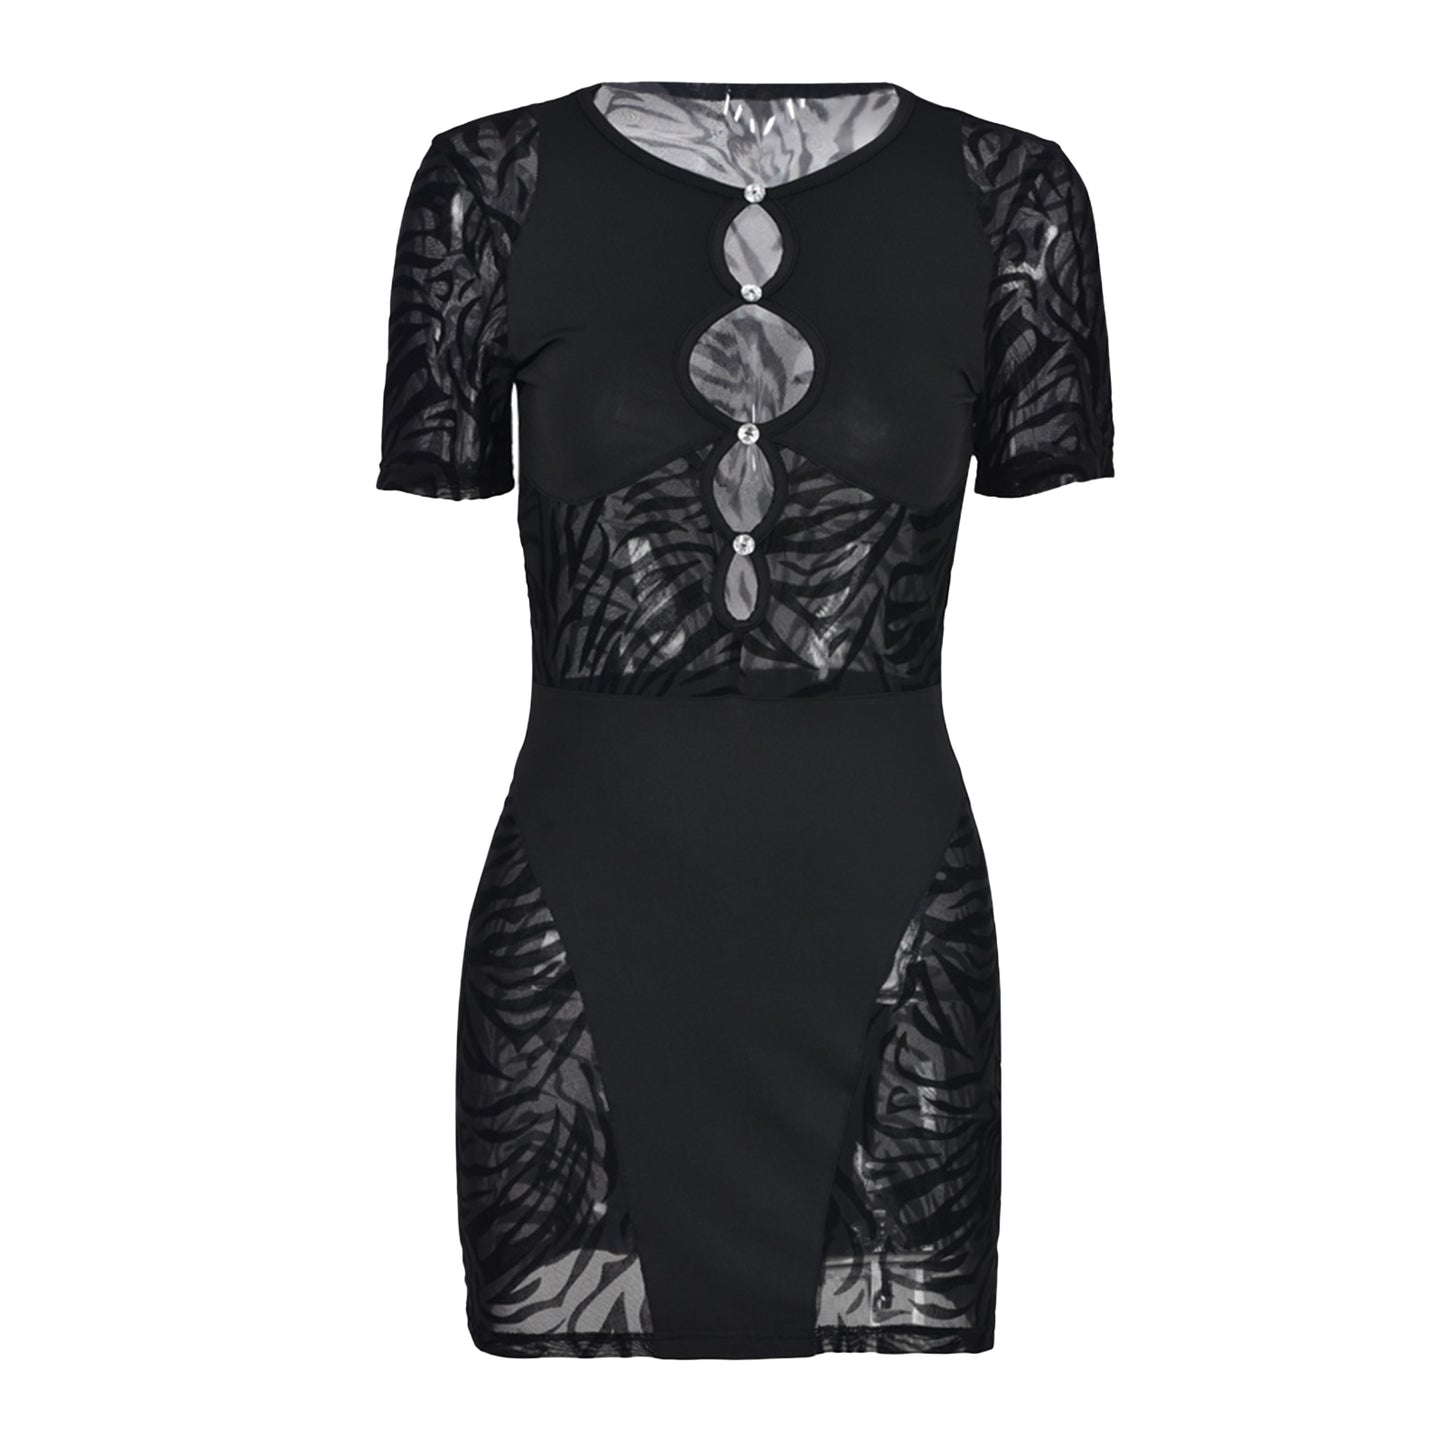 Sexy Women Perspective Bodycon Dress Lace Hollow Out Long Sling Dress High Split Spaghetti Strap Club Party Beach Dress